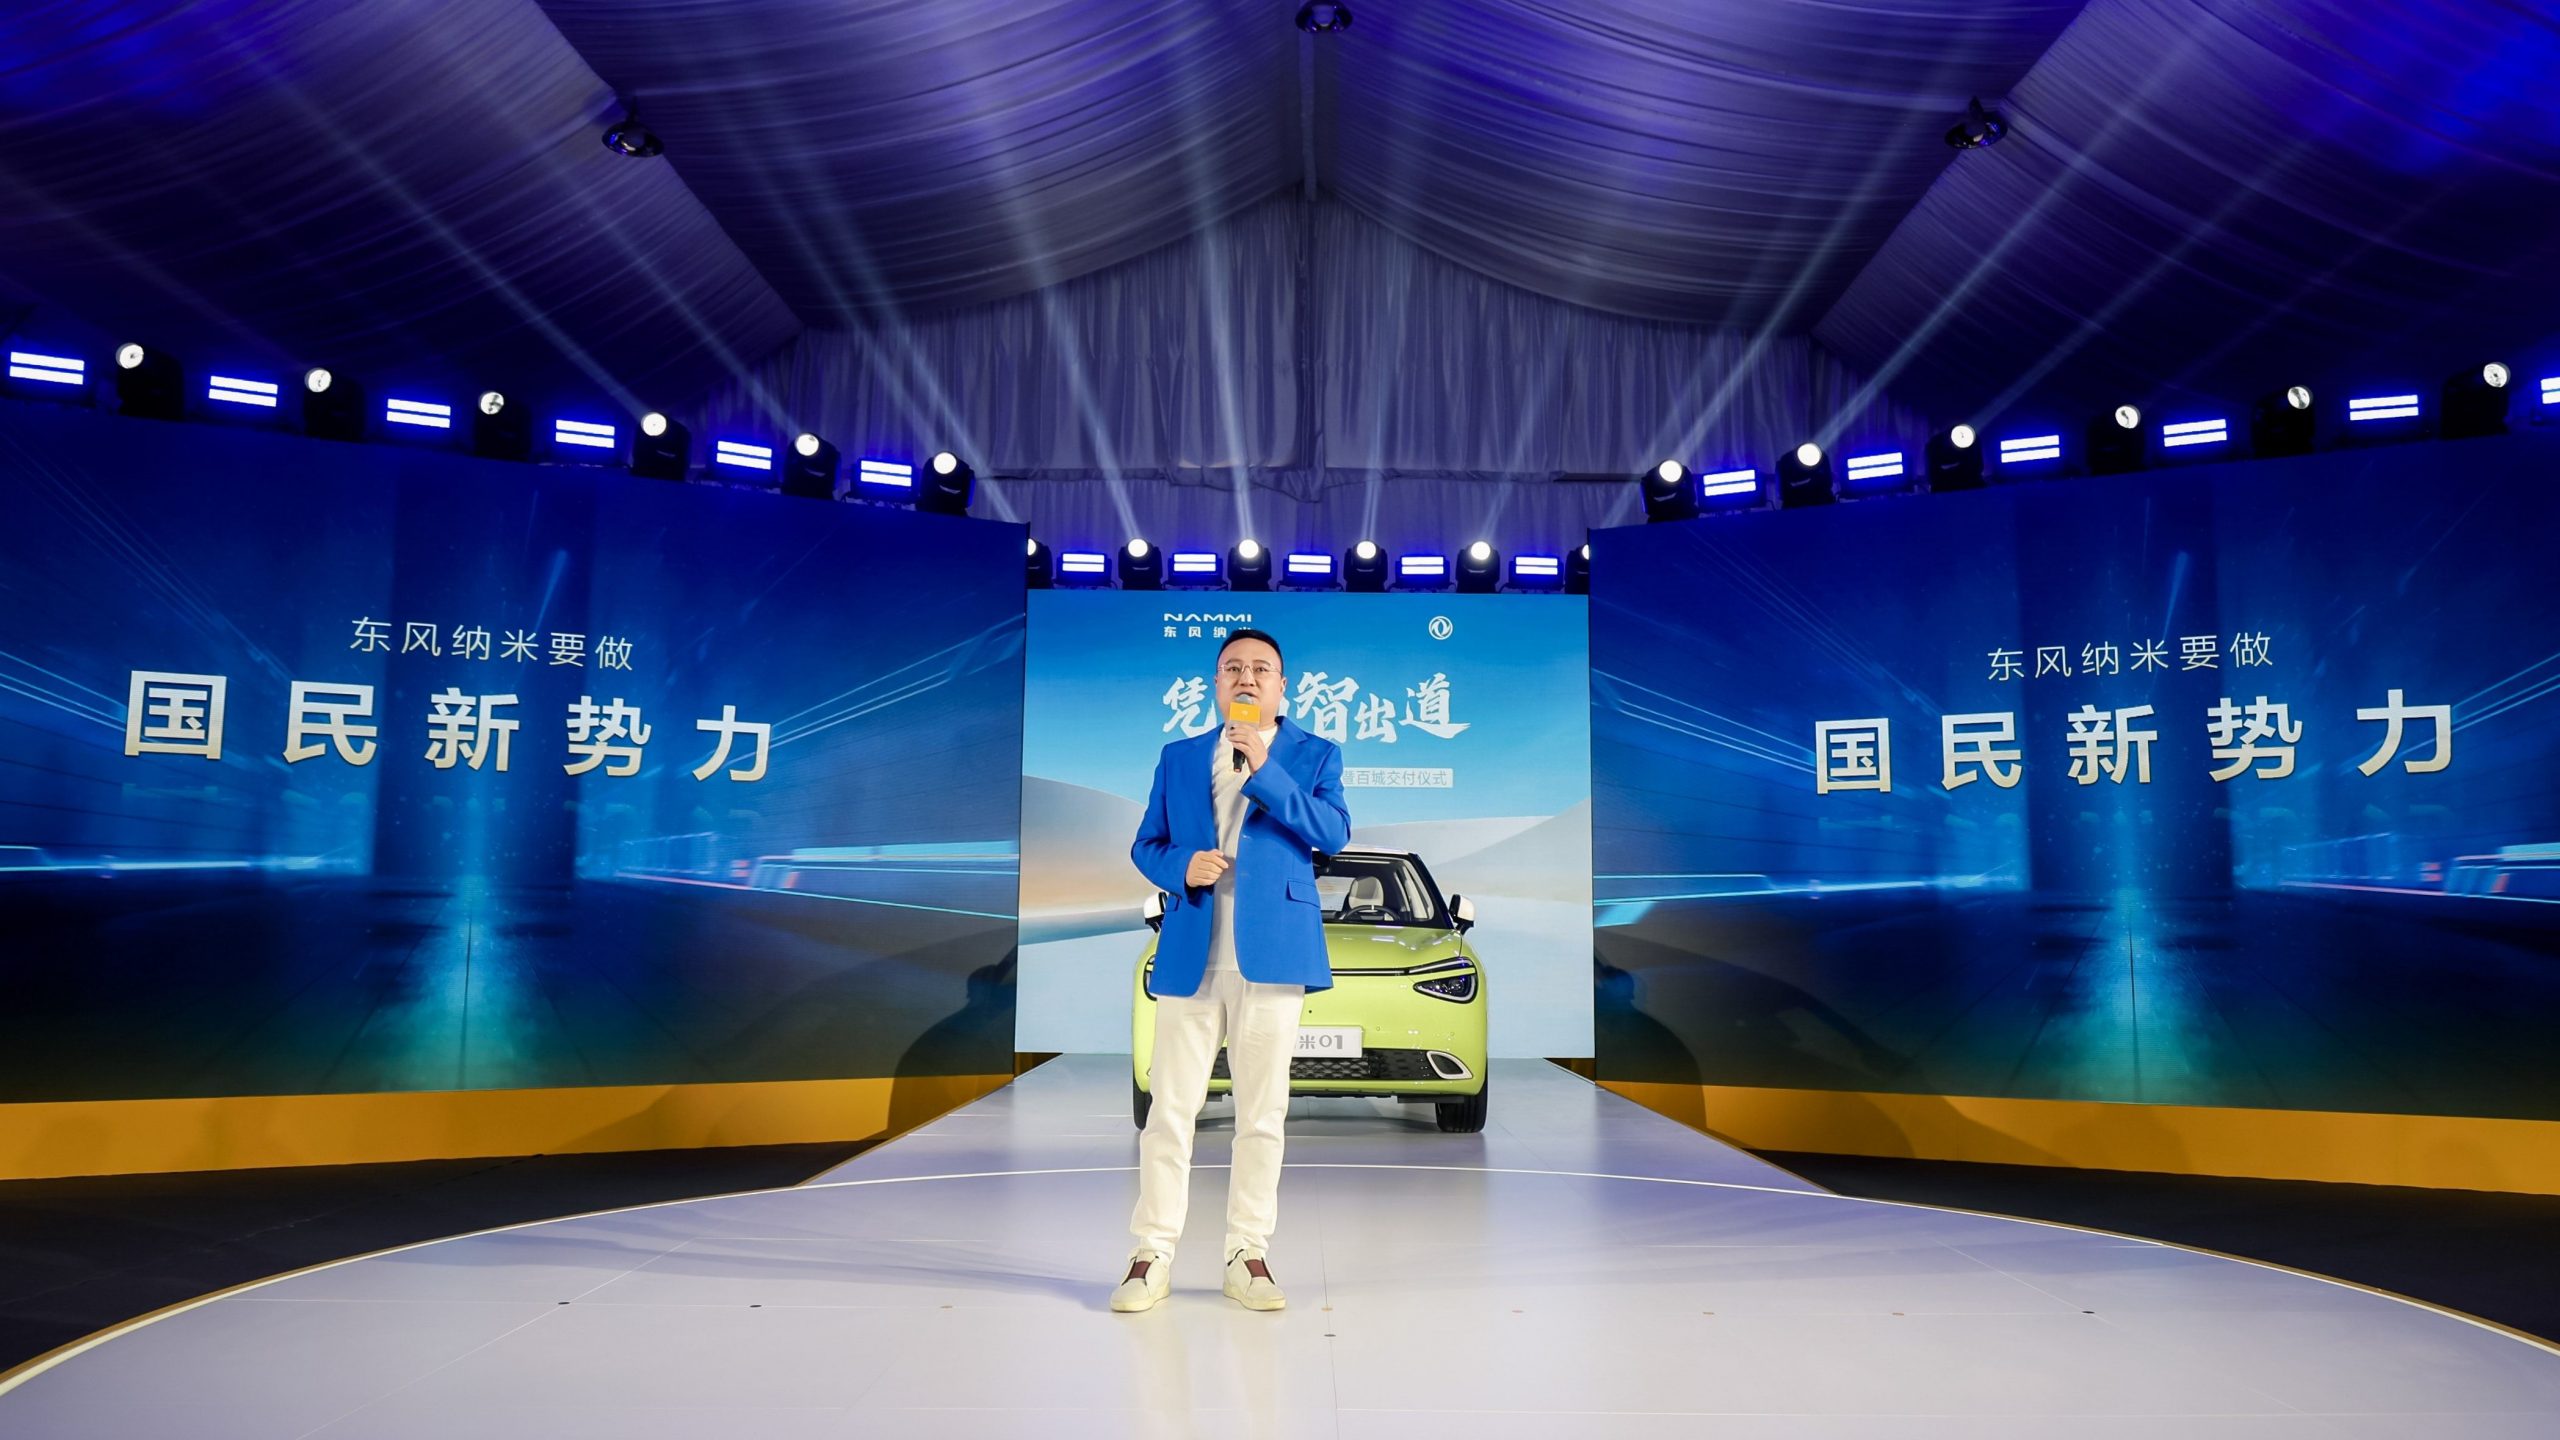 New Electric Vehicle DF Nano 01 by DF Launched in Wuhan